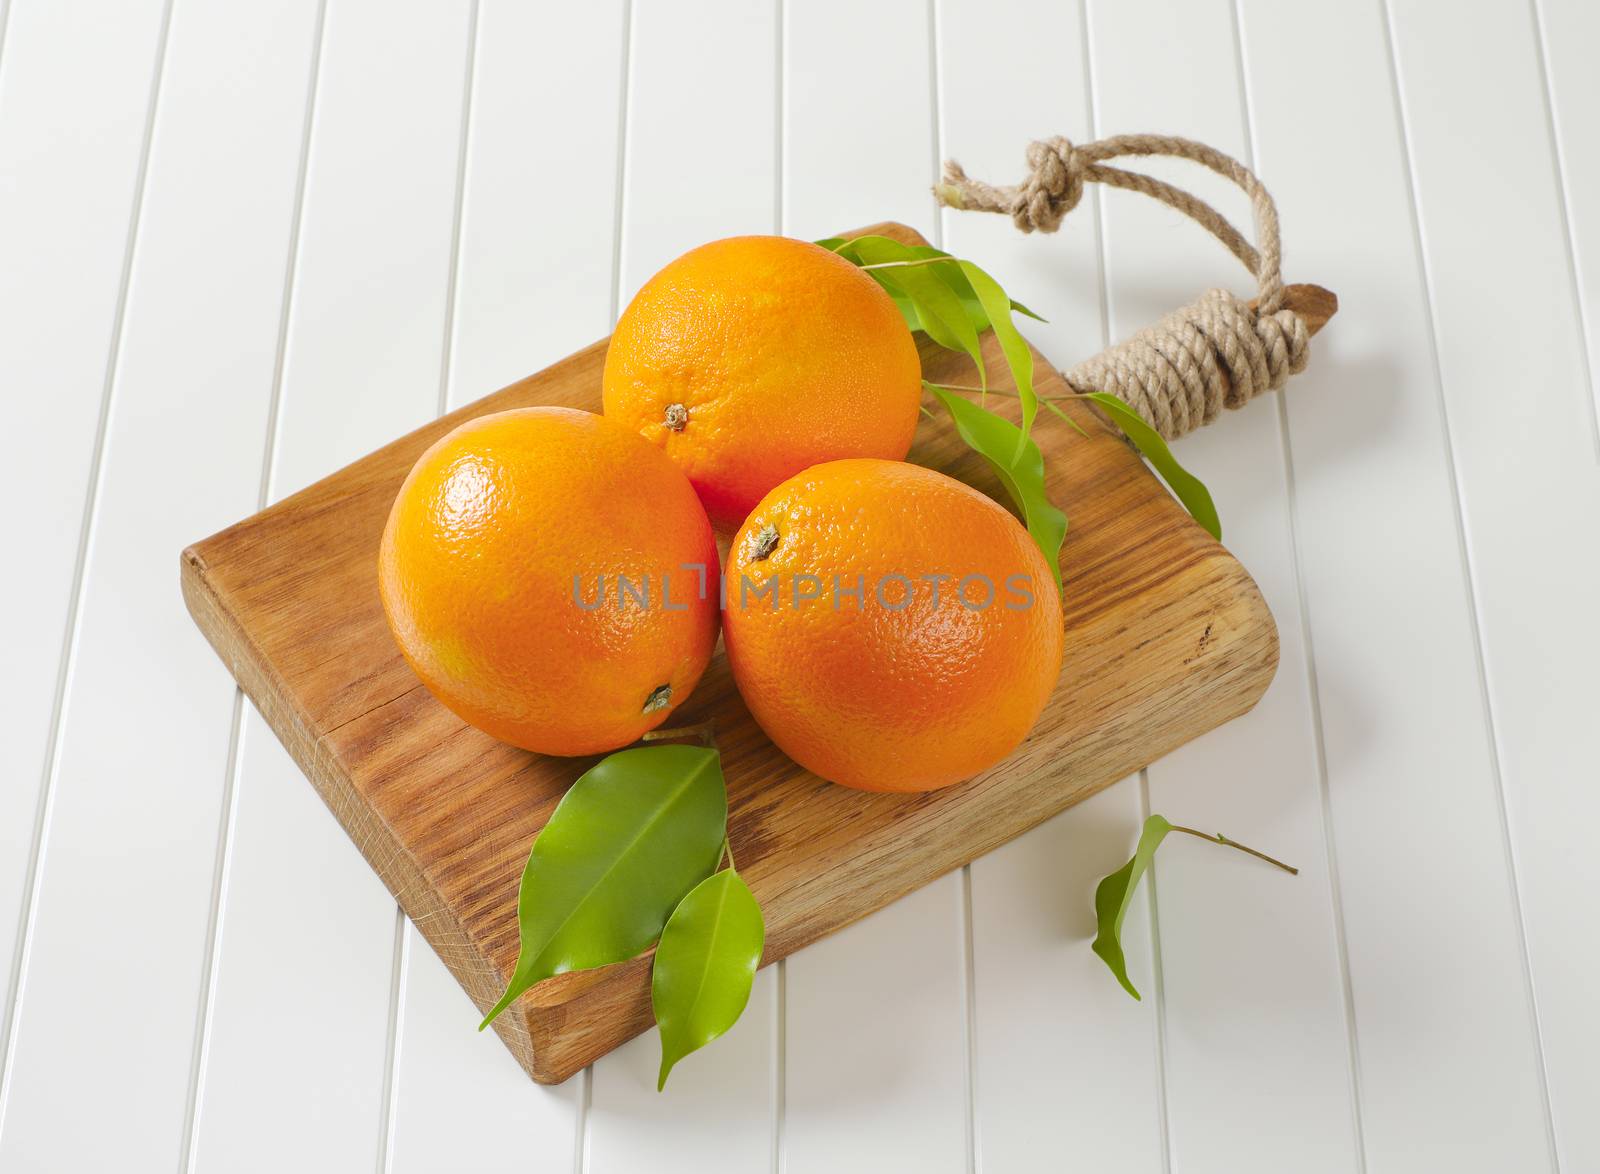 Three whole ripe oranges and leaves on cutting board